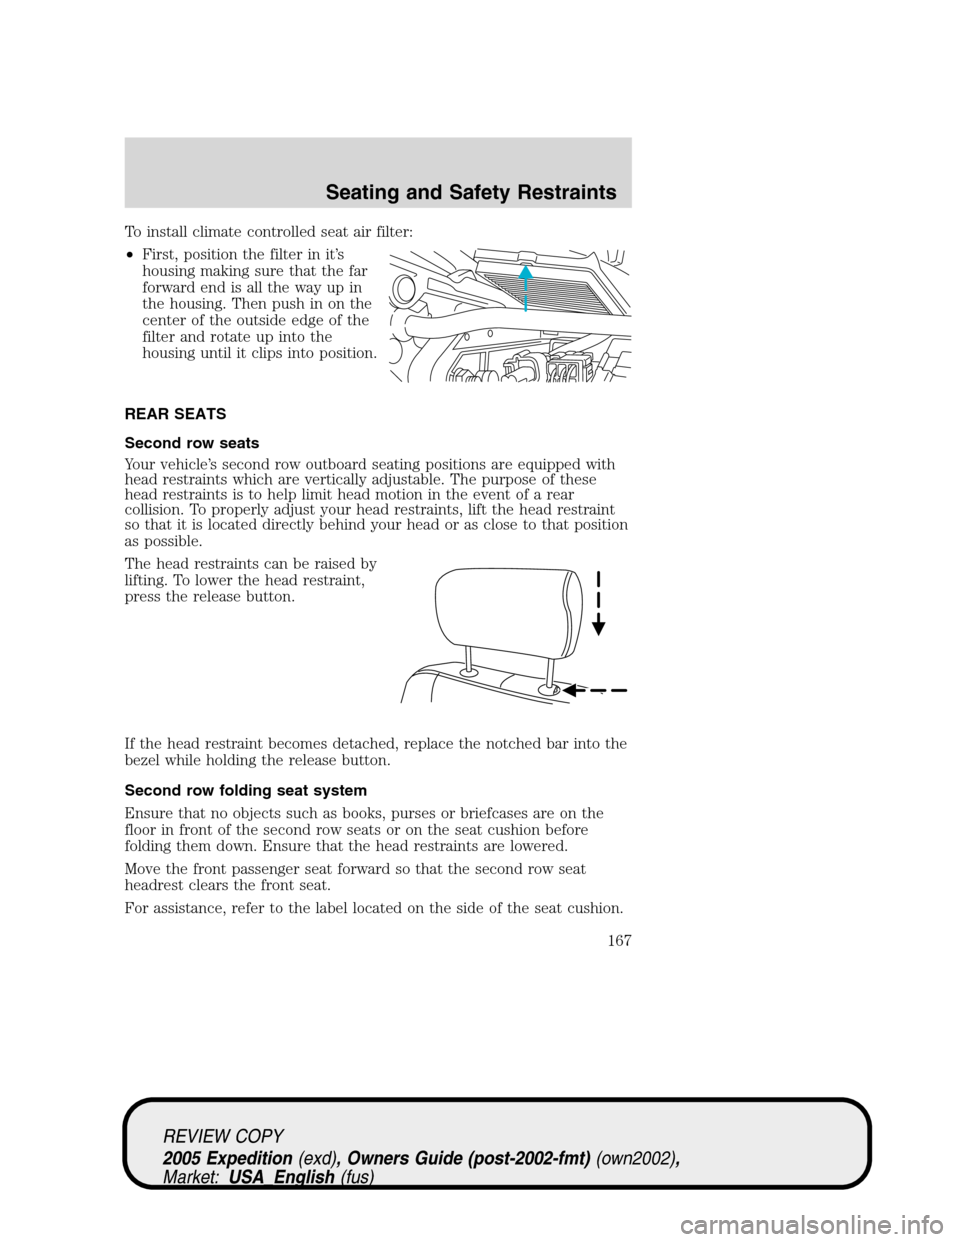 FORD EXPEDITION 2005 2.G Owners Manual To install climate controlled seat air filter:
•First, position the filter in it’s
housing making sure that the far
forward end is all the way up in
the housing. Then push in on the
center of the 